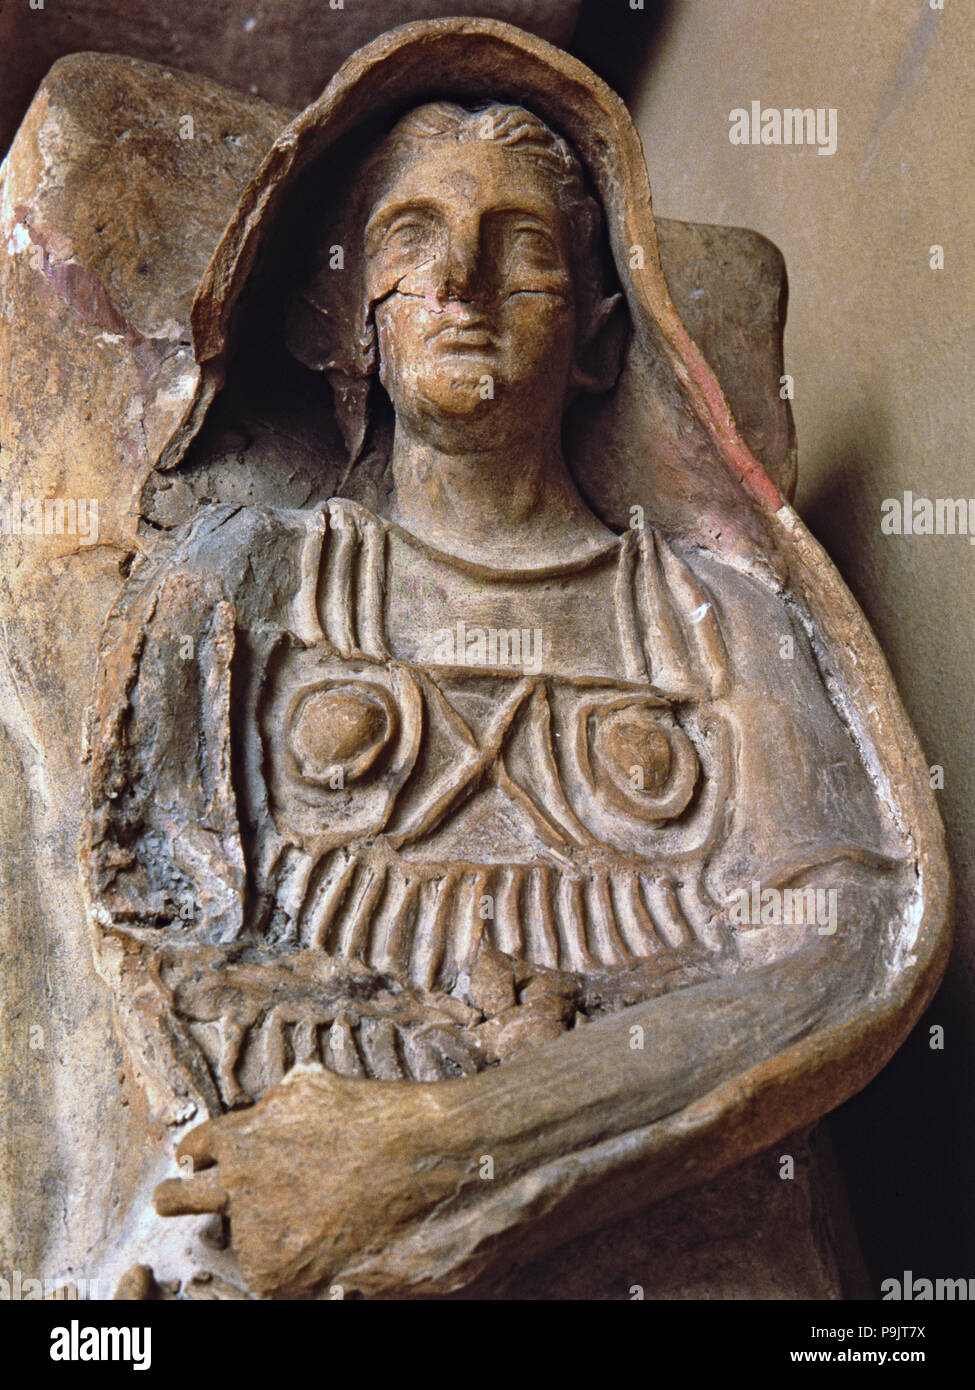 Etruscan terracotta sarcophagus with the image of the deceased, detail. Stock Photo